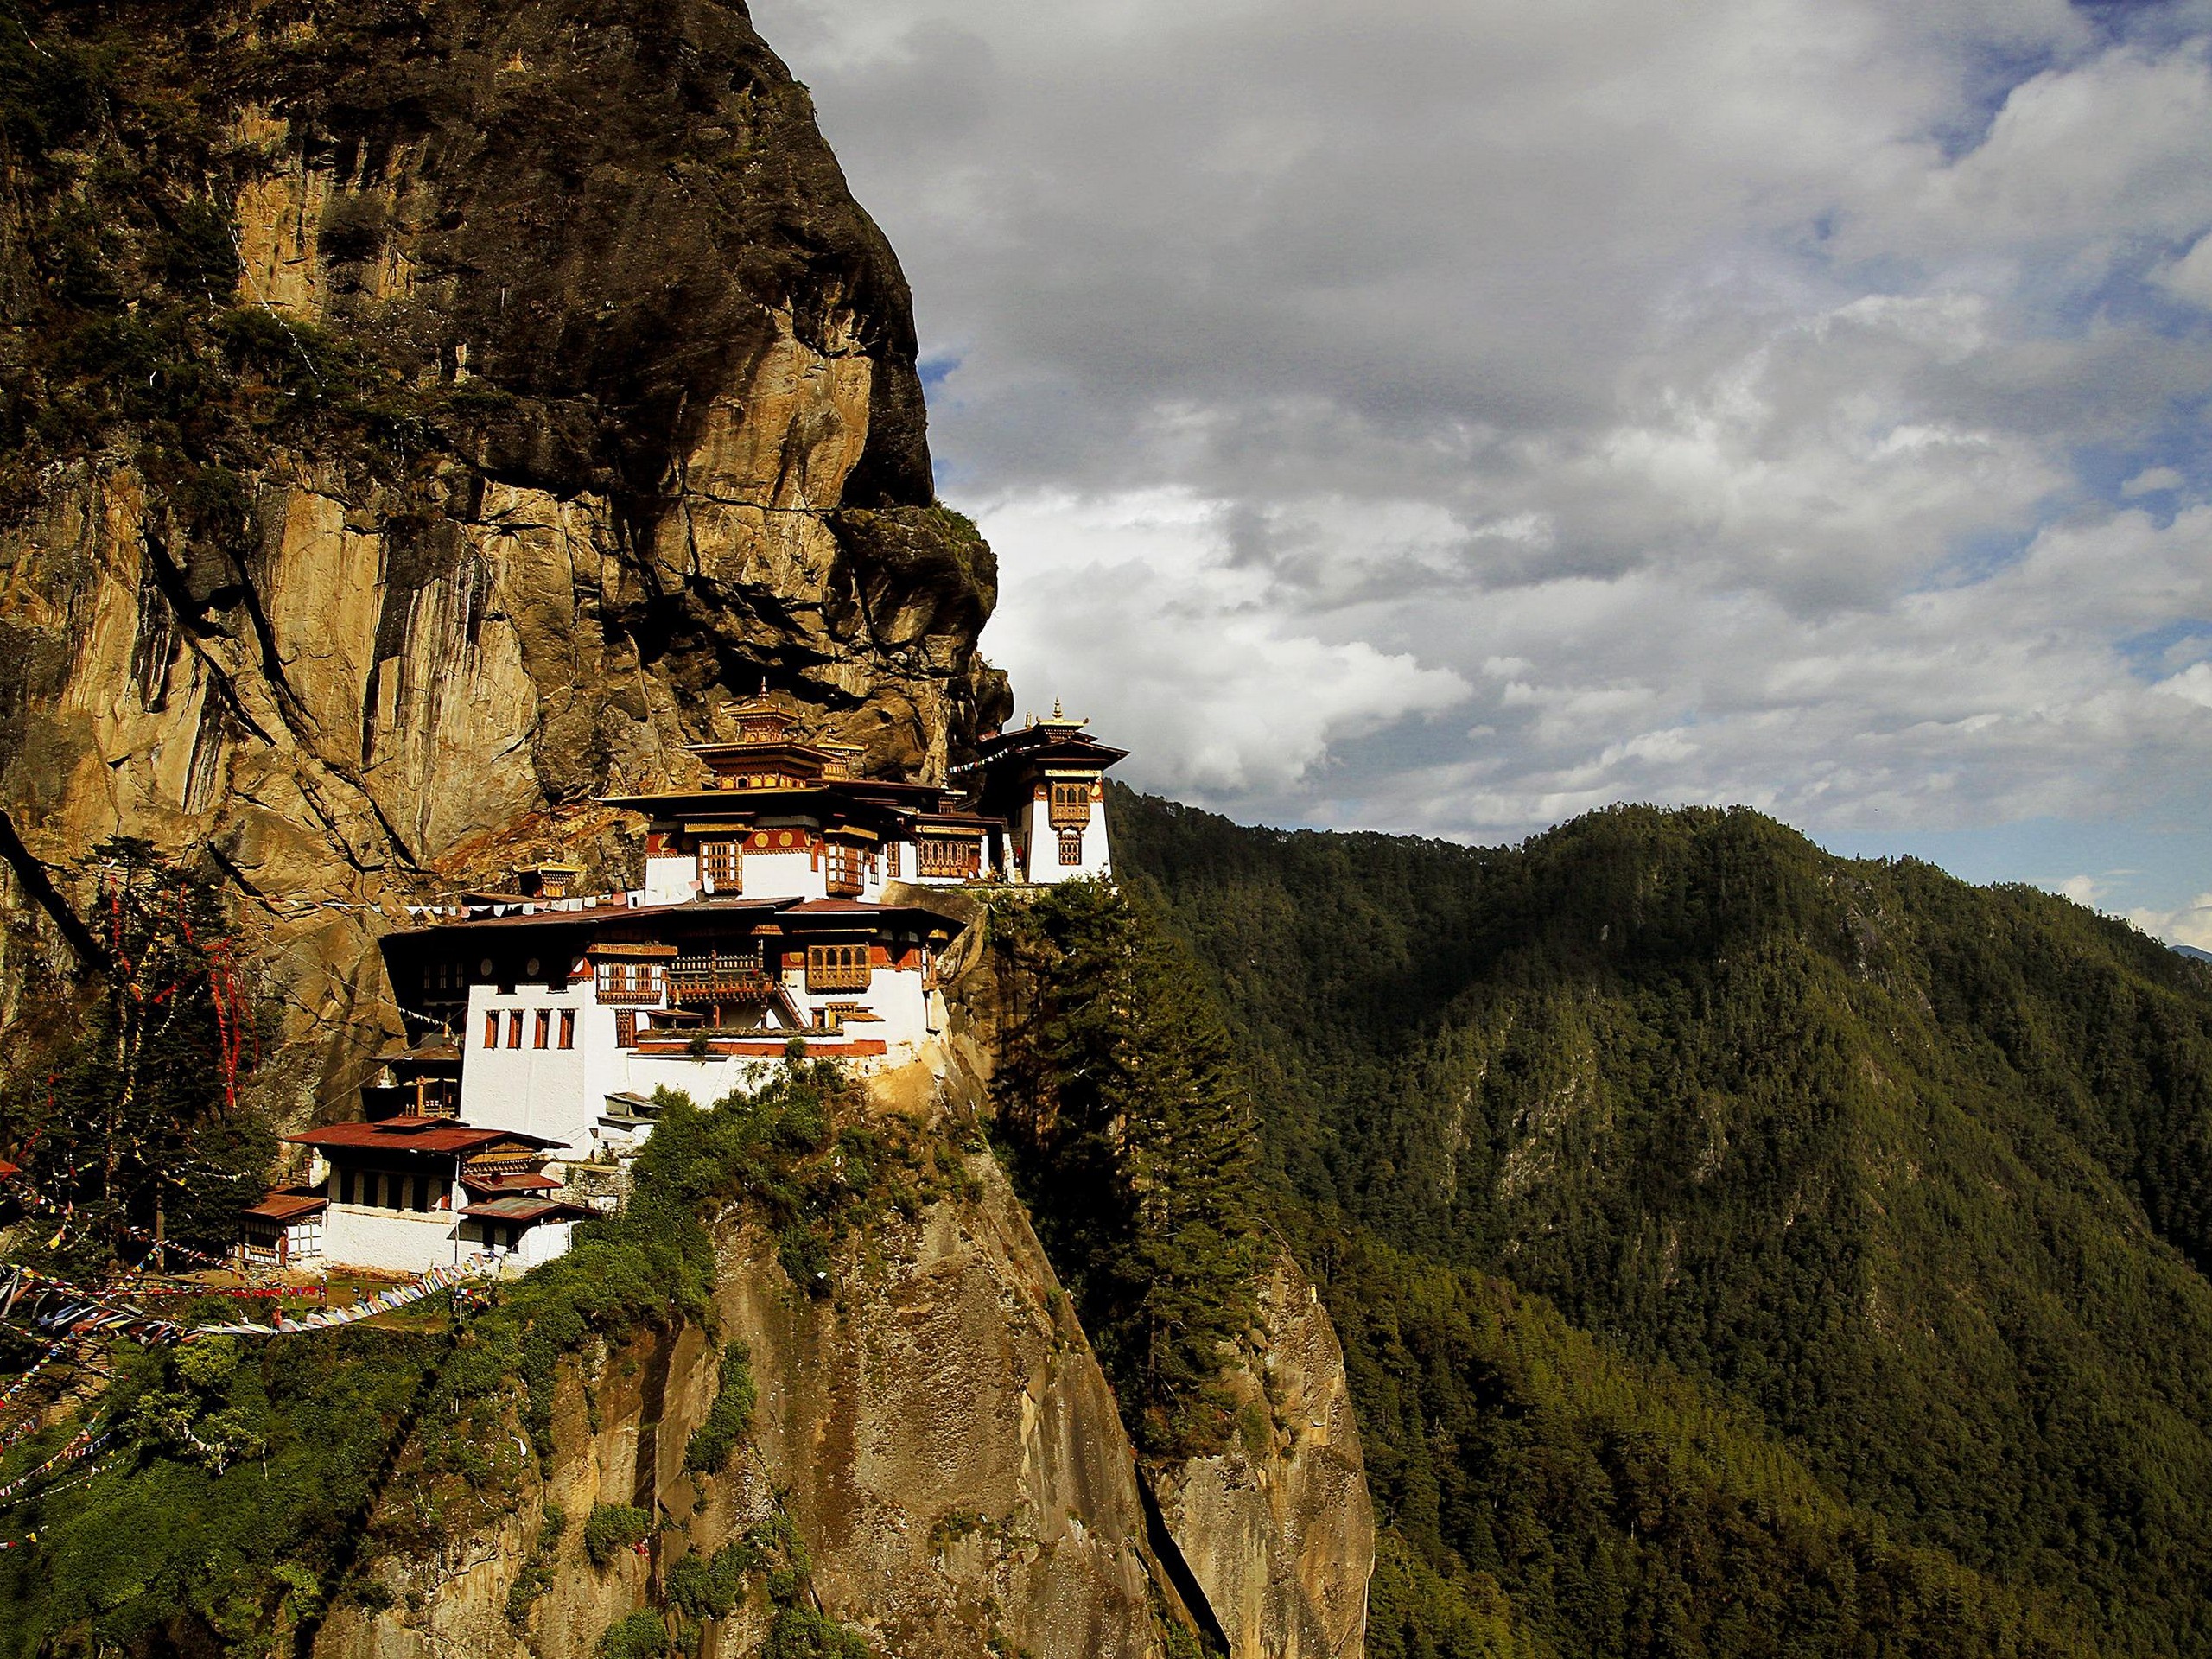 Temple in Bhutan on a picturesque cliff